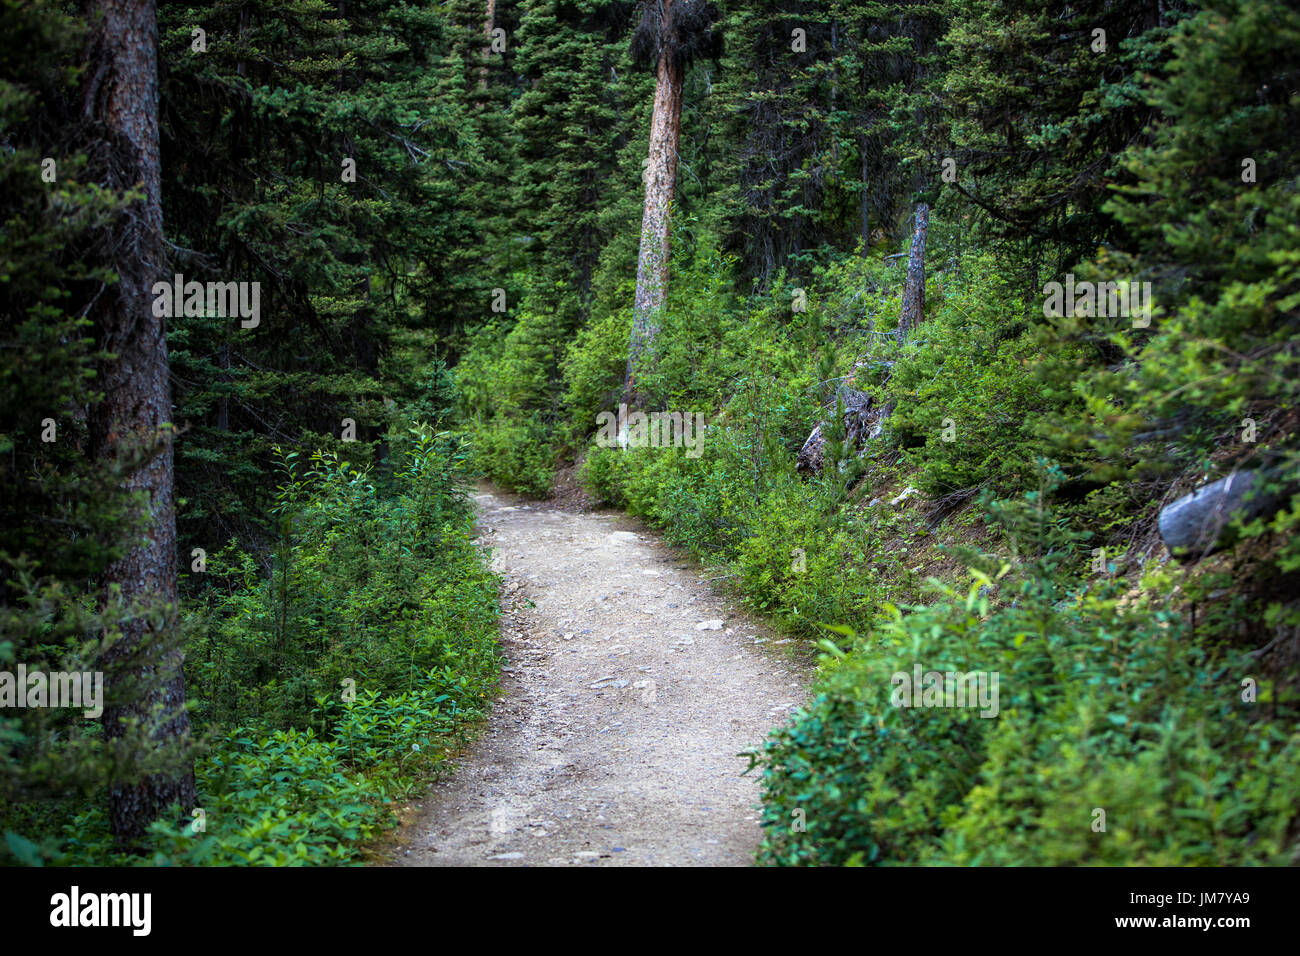 The beautiful walking paths welcome thousands of visitors every day to the incredible setting of the Canadian Rocky Mountains. Stock Photo